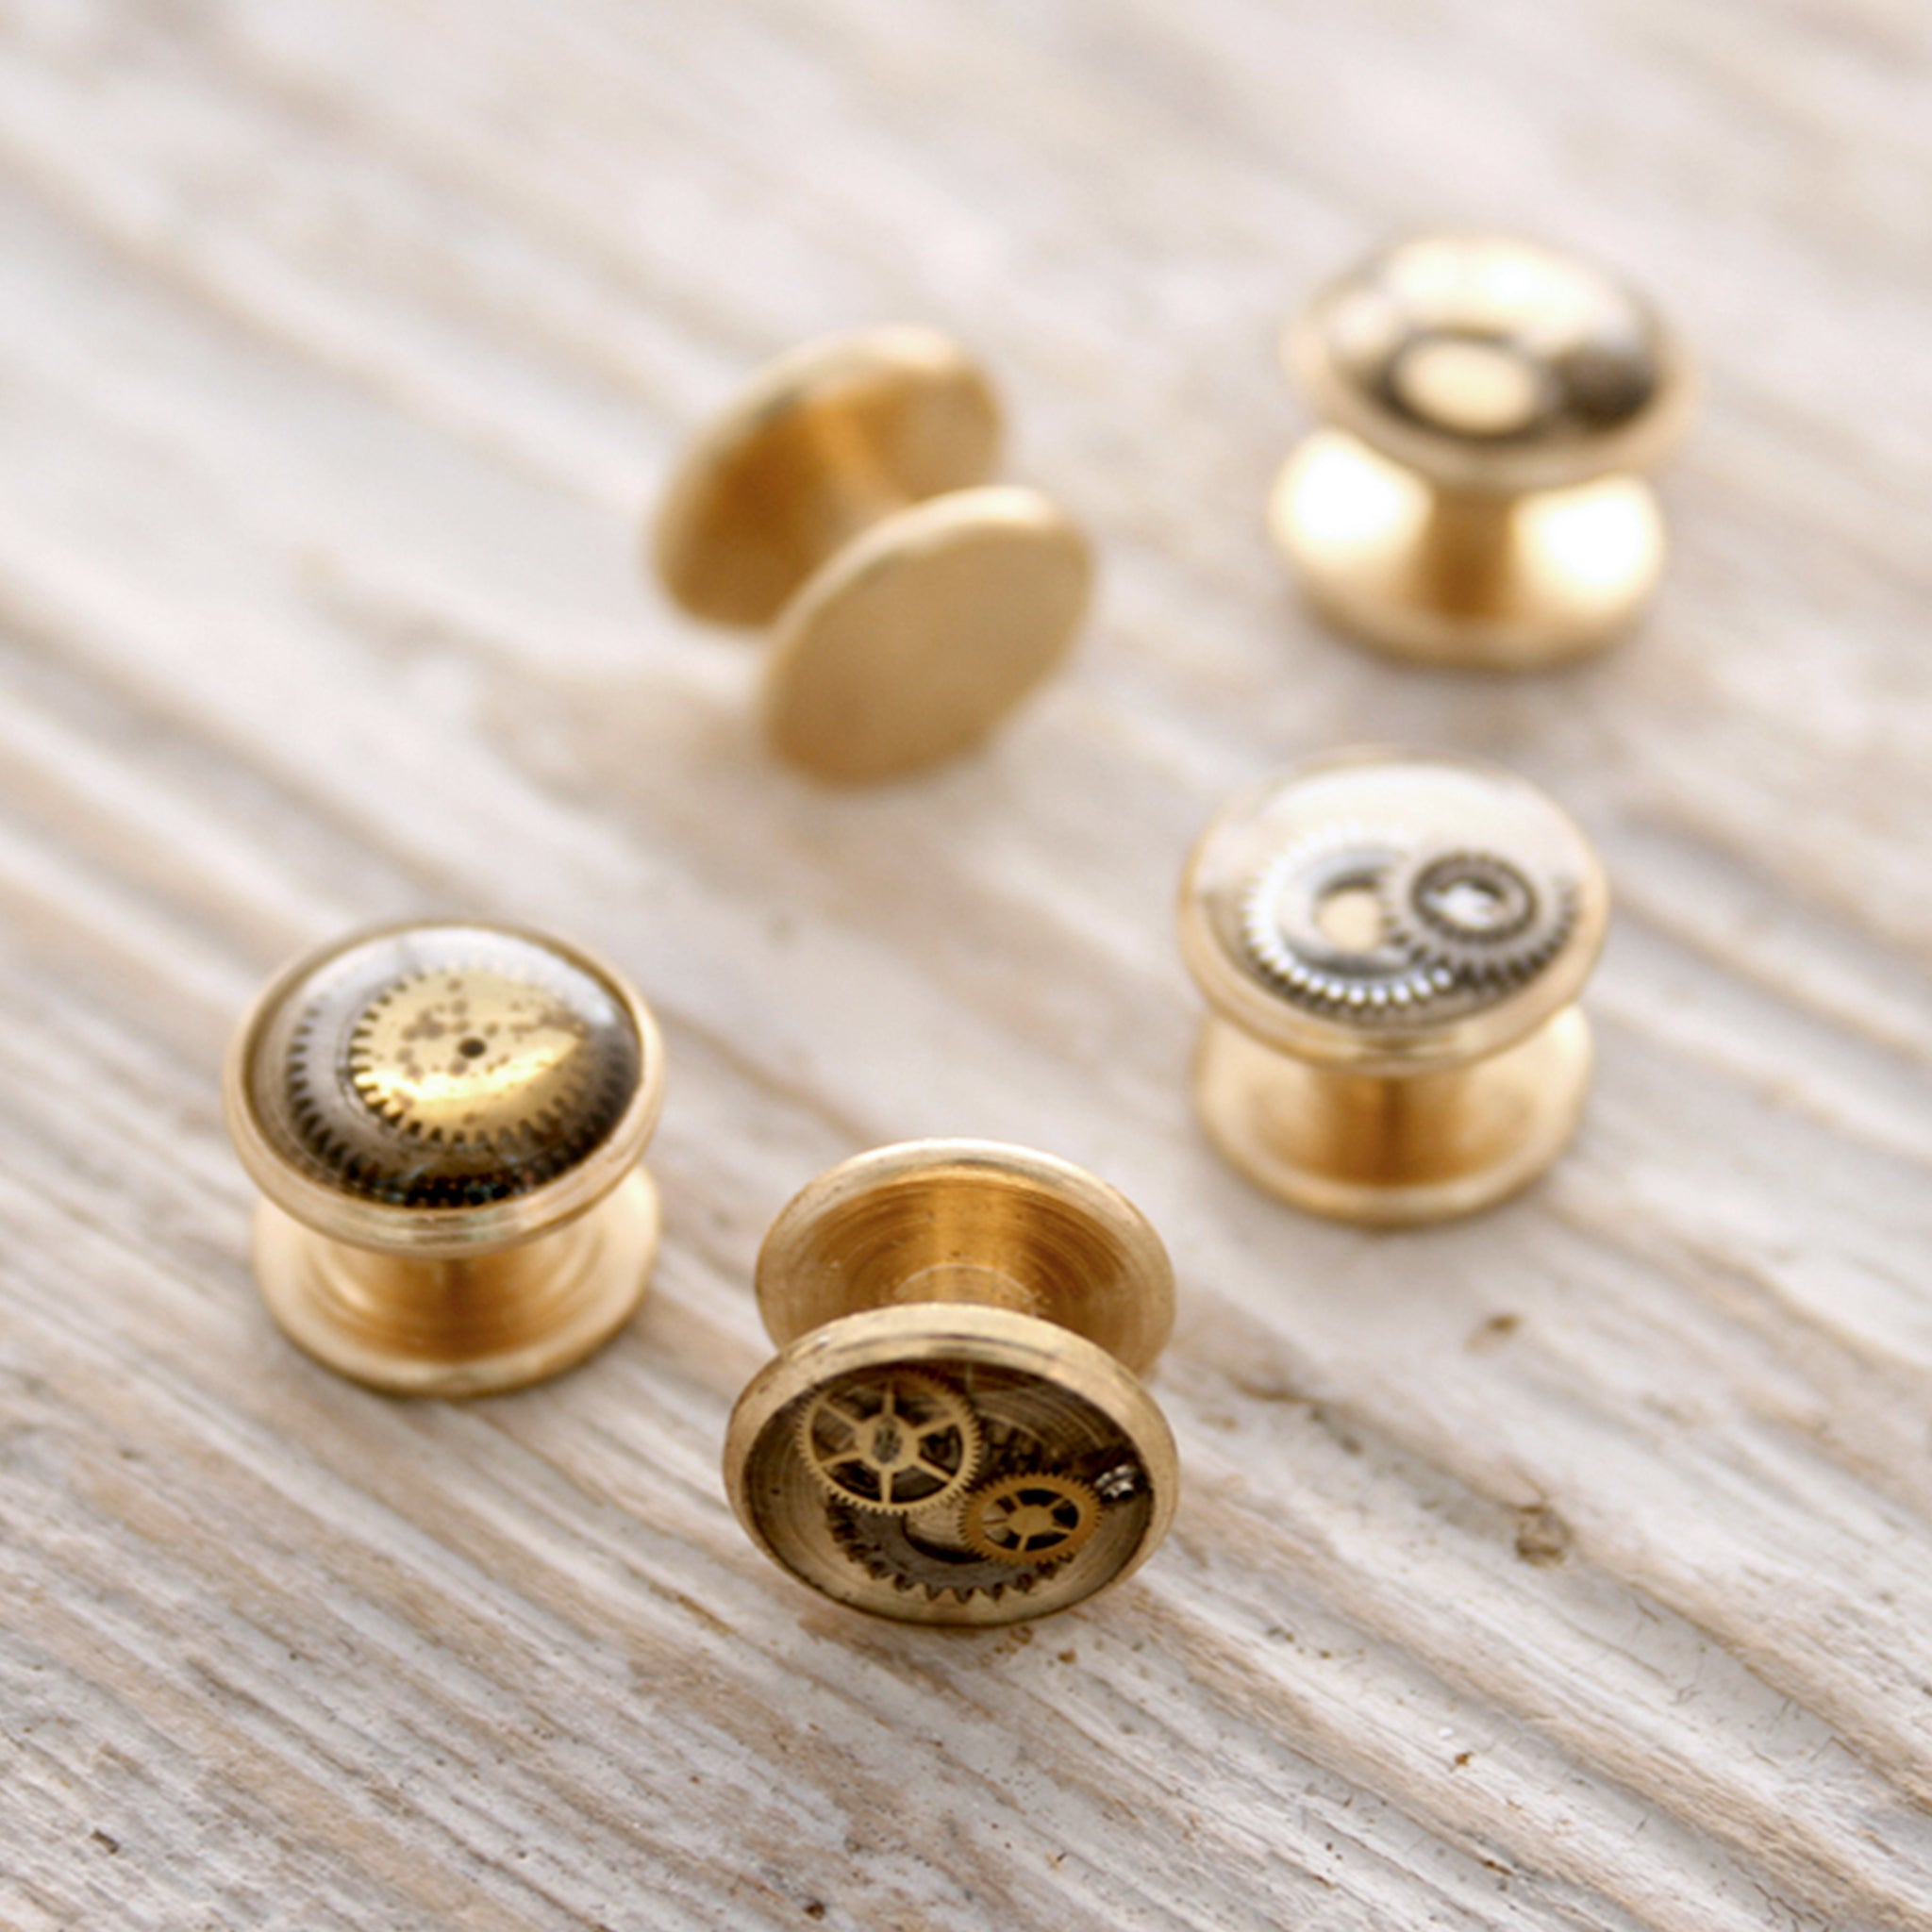 Little tuxedo studs made of raw brass, watch parts and resin